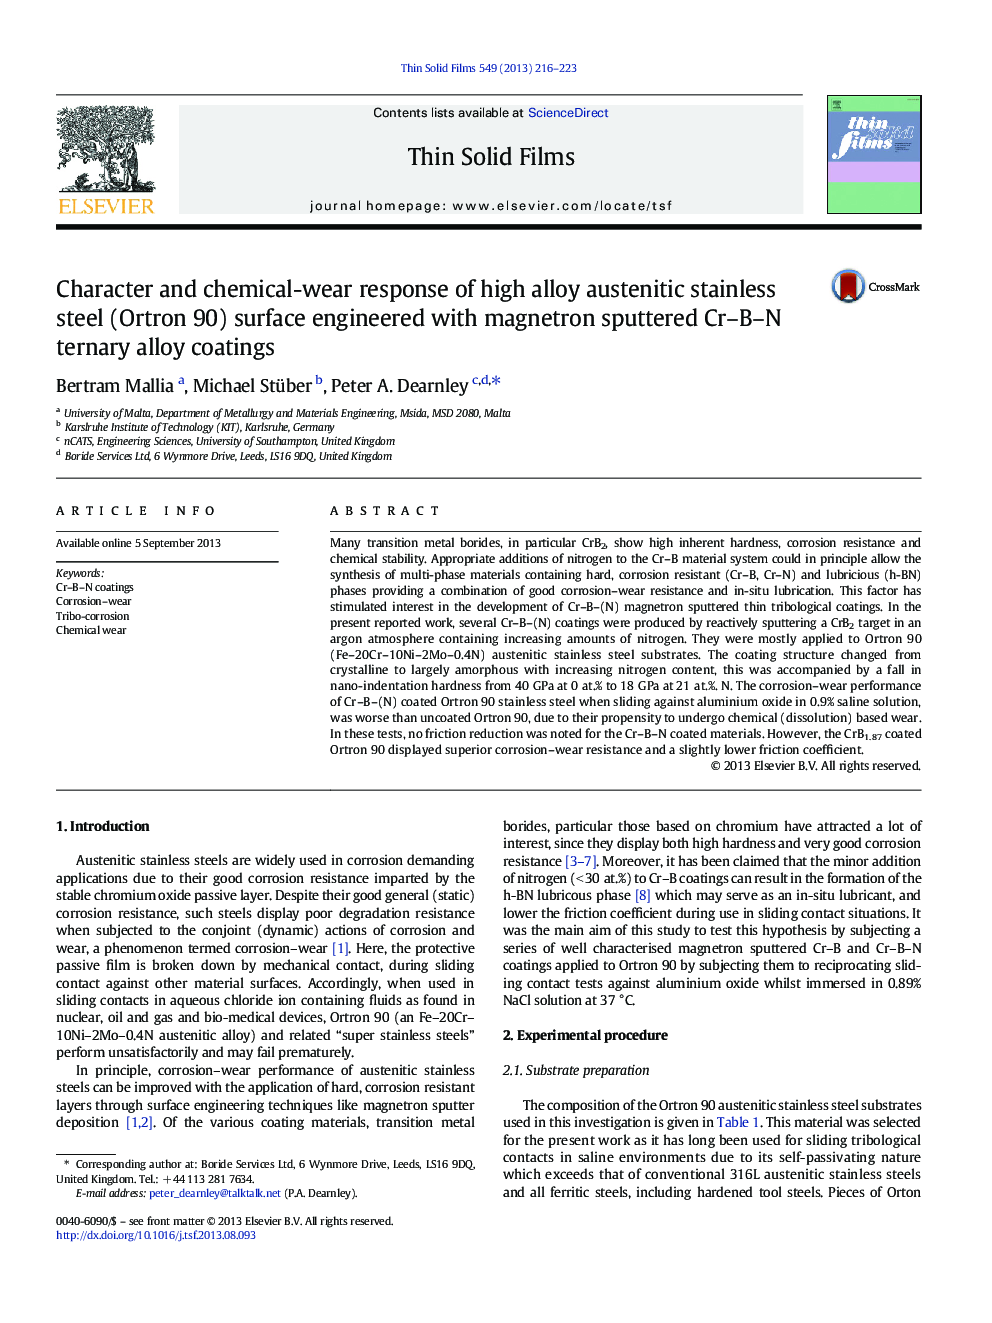 Character and chemical-wear response of high alloy austenitic stainless steel (Ortron 90) surface engineered with magnetron sputtered Cr–B–N ternary alloy coatings